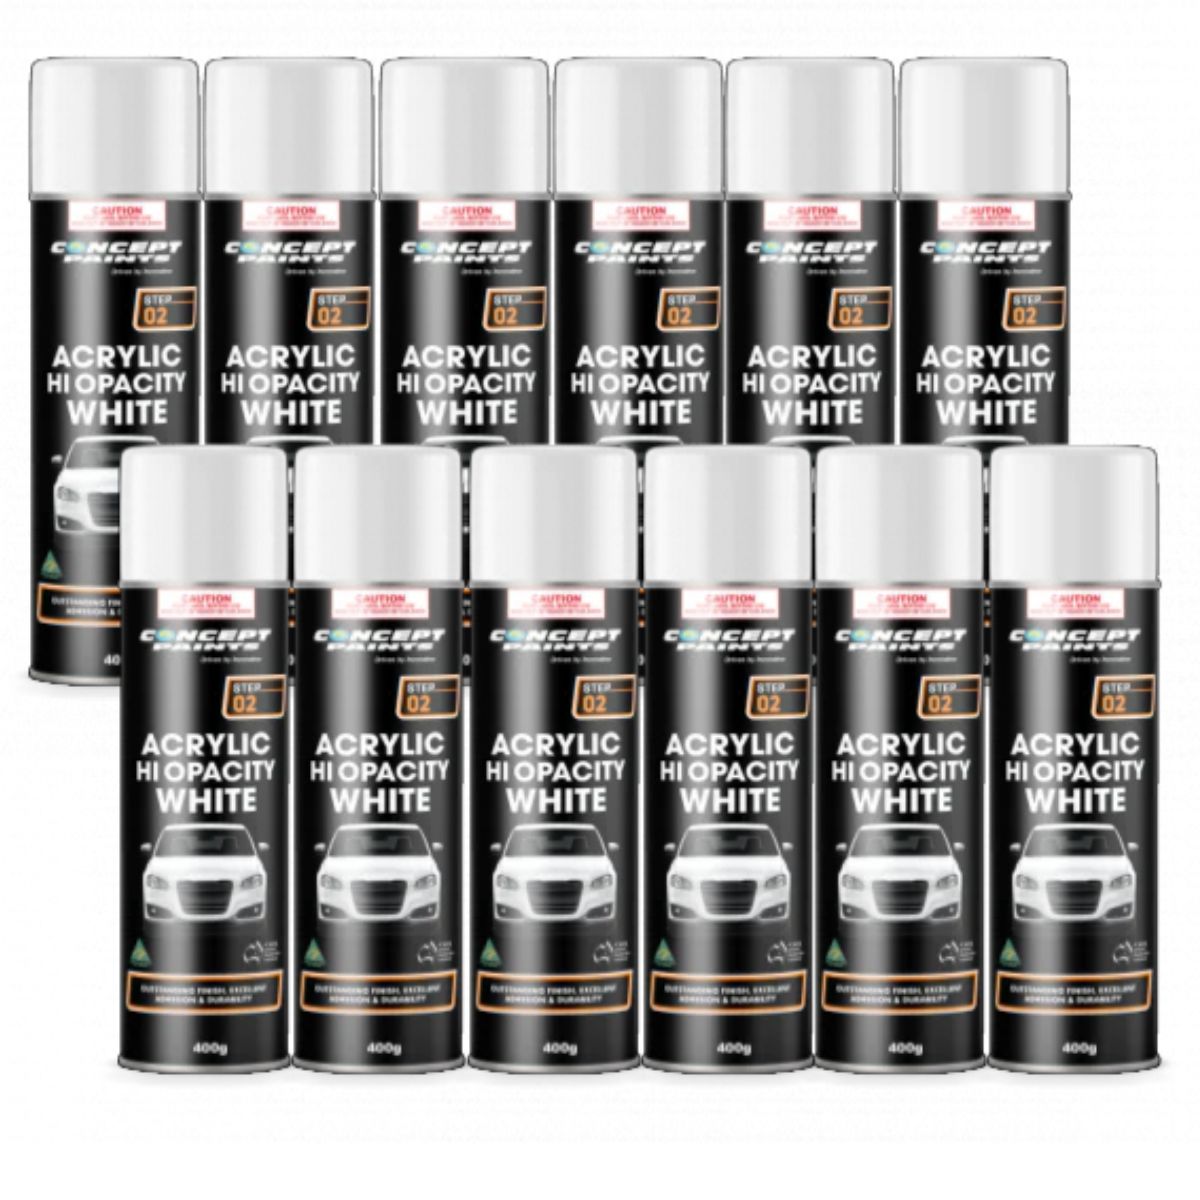 Concept Paints ACRYLIC HI OPACITY WHITE AEROSOL (12 Cans) - South East Clearance Centre